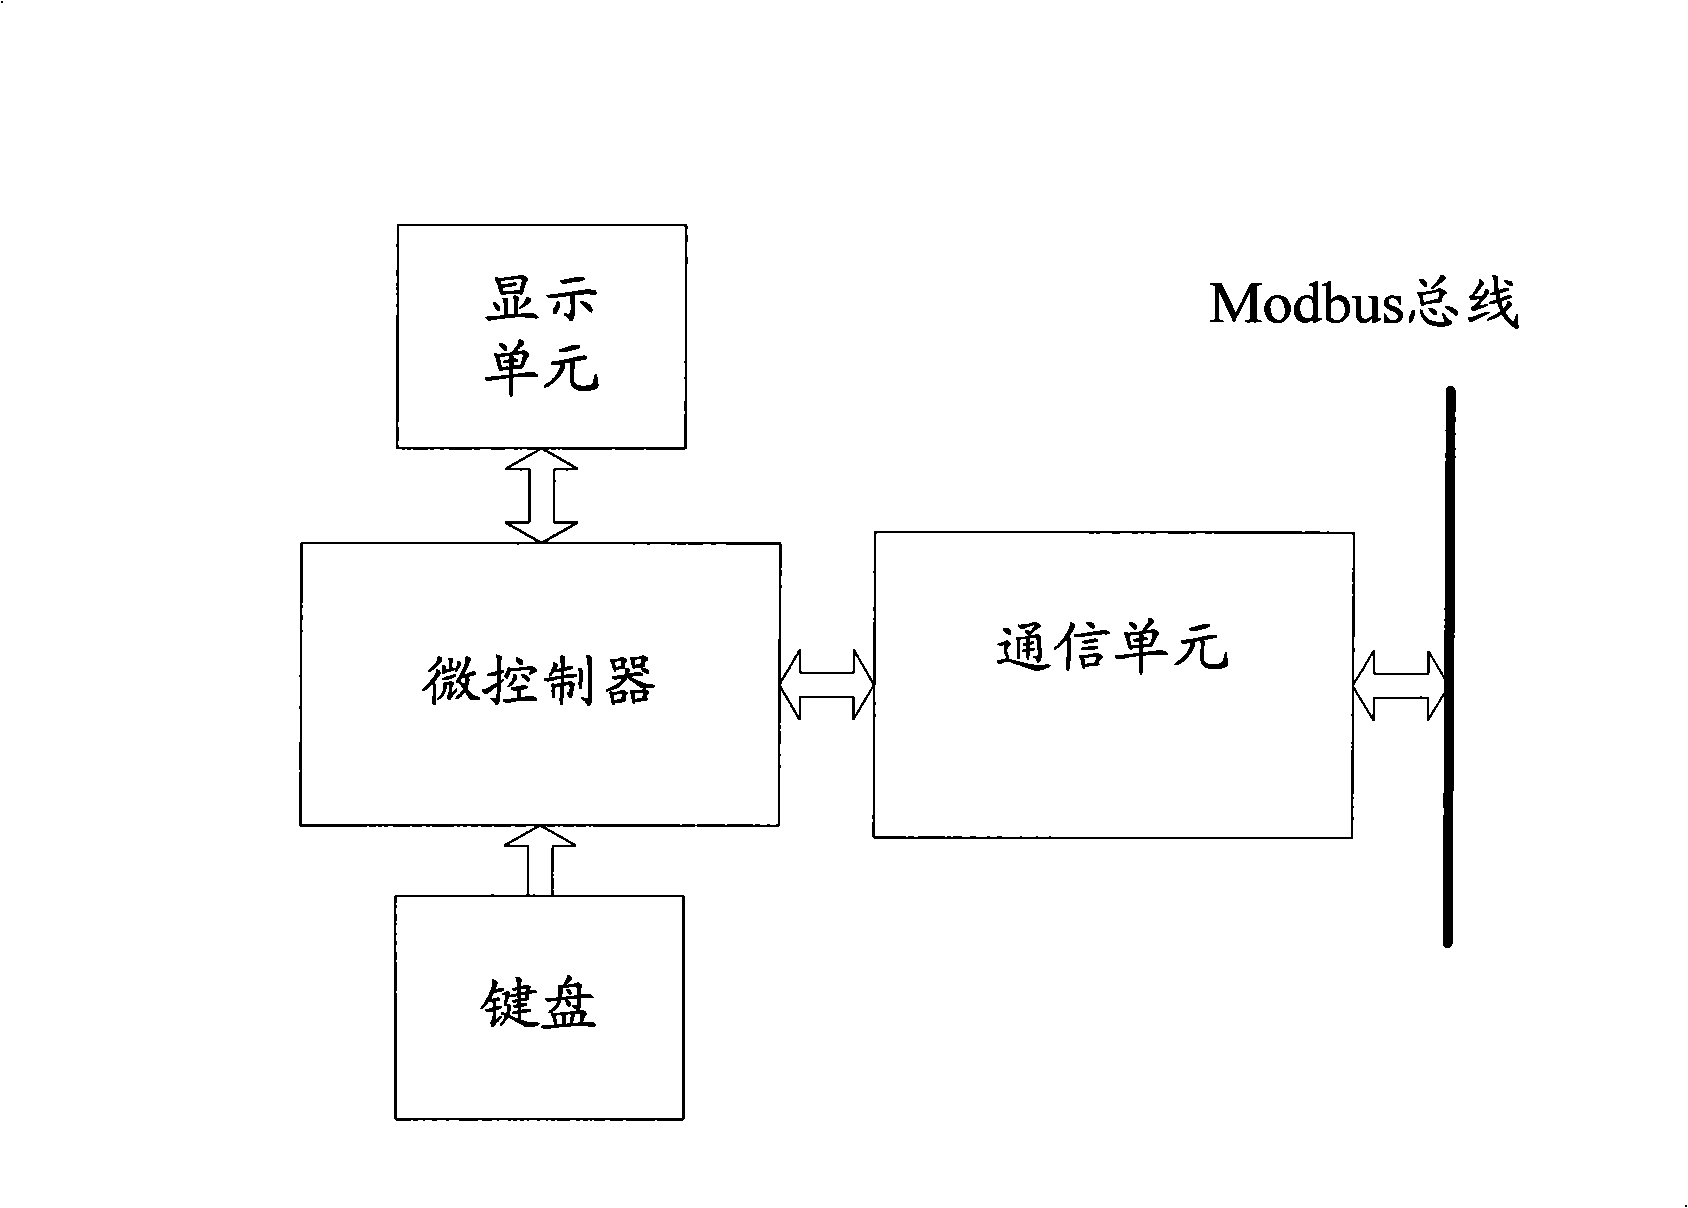 Method for allocating addresses from node device in Modbus communication network